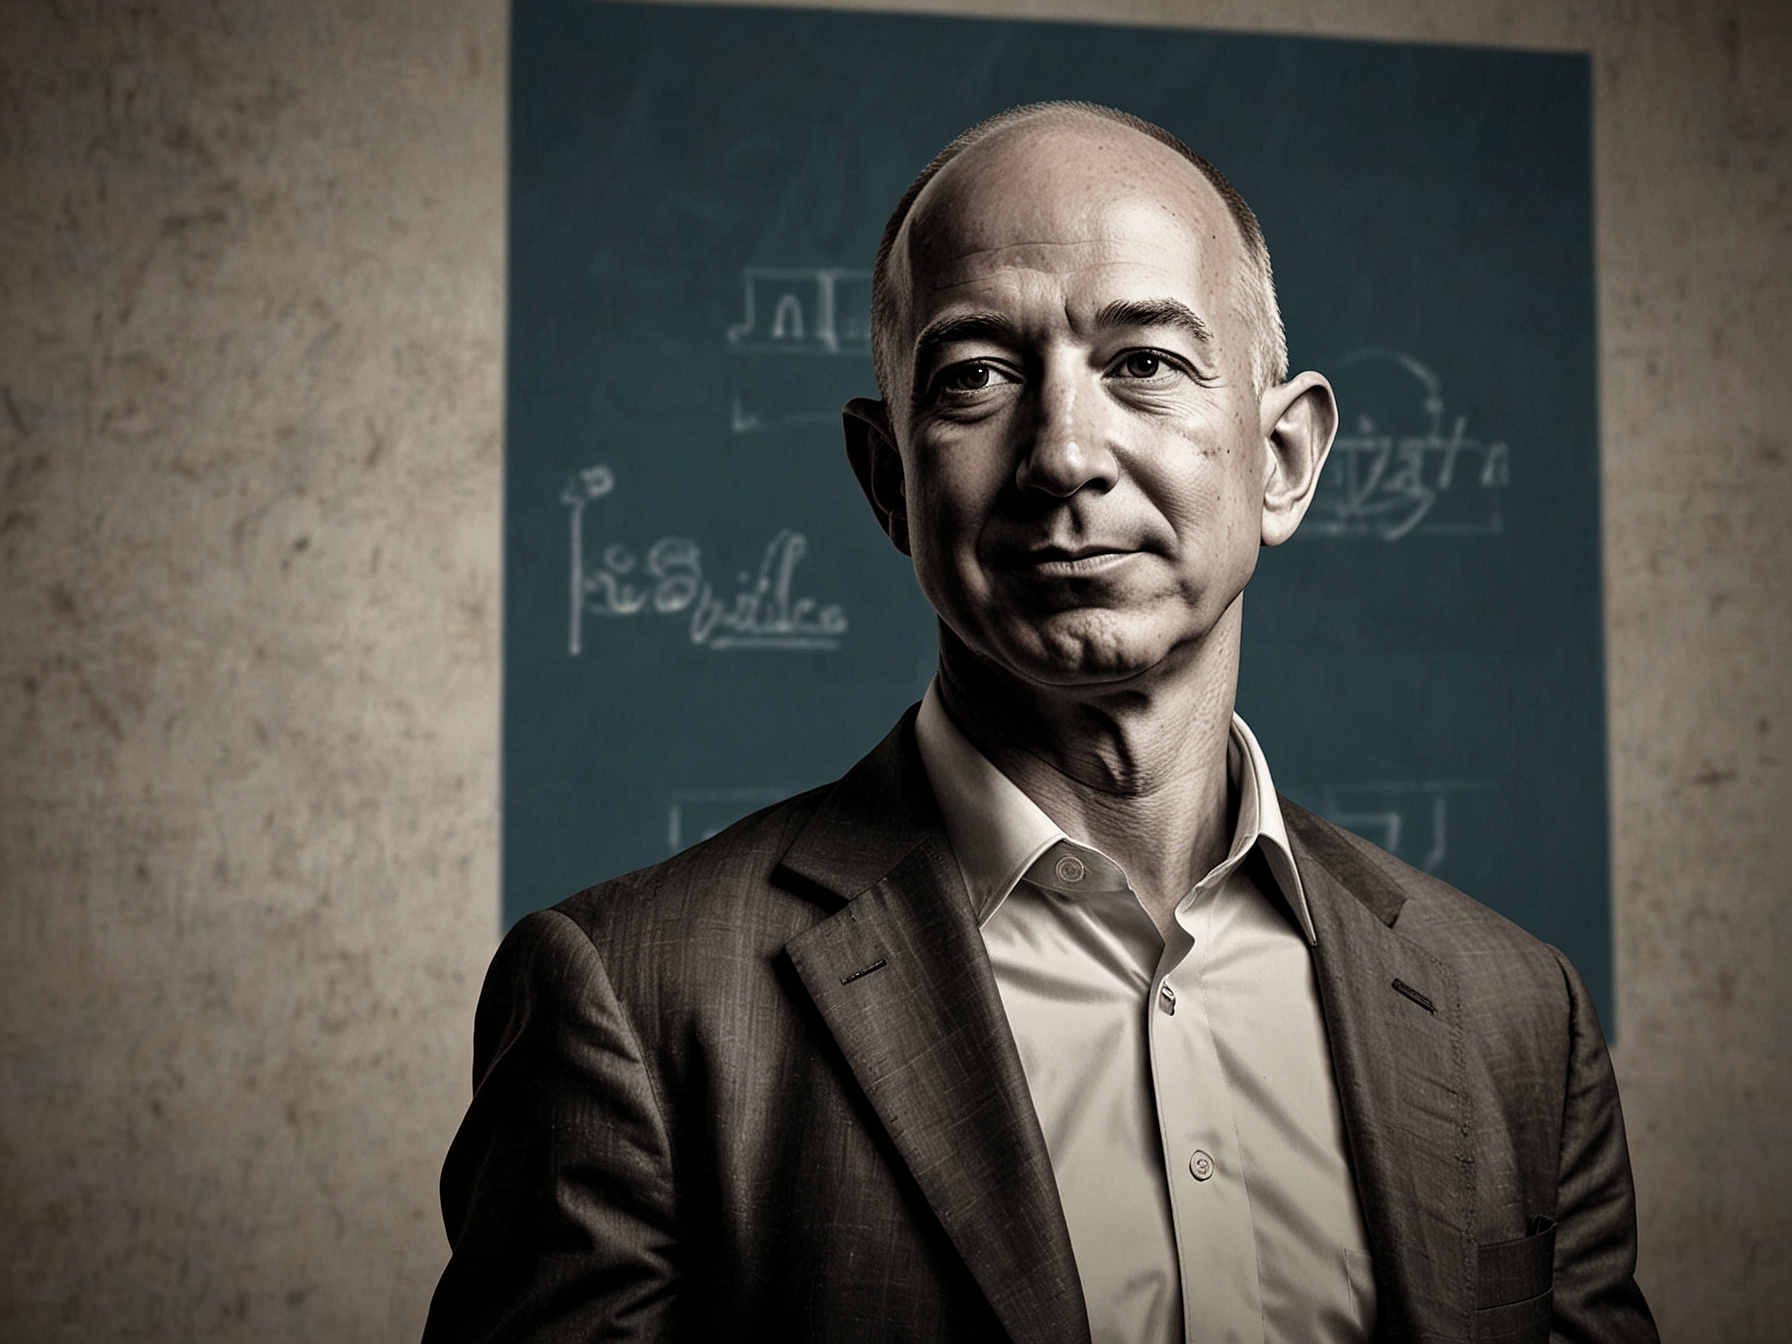 An illustration showing Jeff Bezos in front of an Amazon logo, symbolizing his decision to sell $5 billion worth of Amazon shares as the company's stock hits an all-time high.